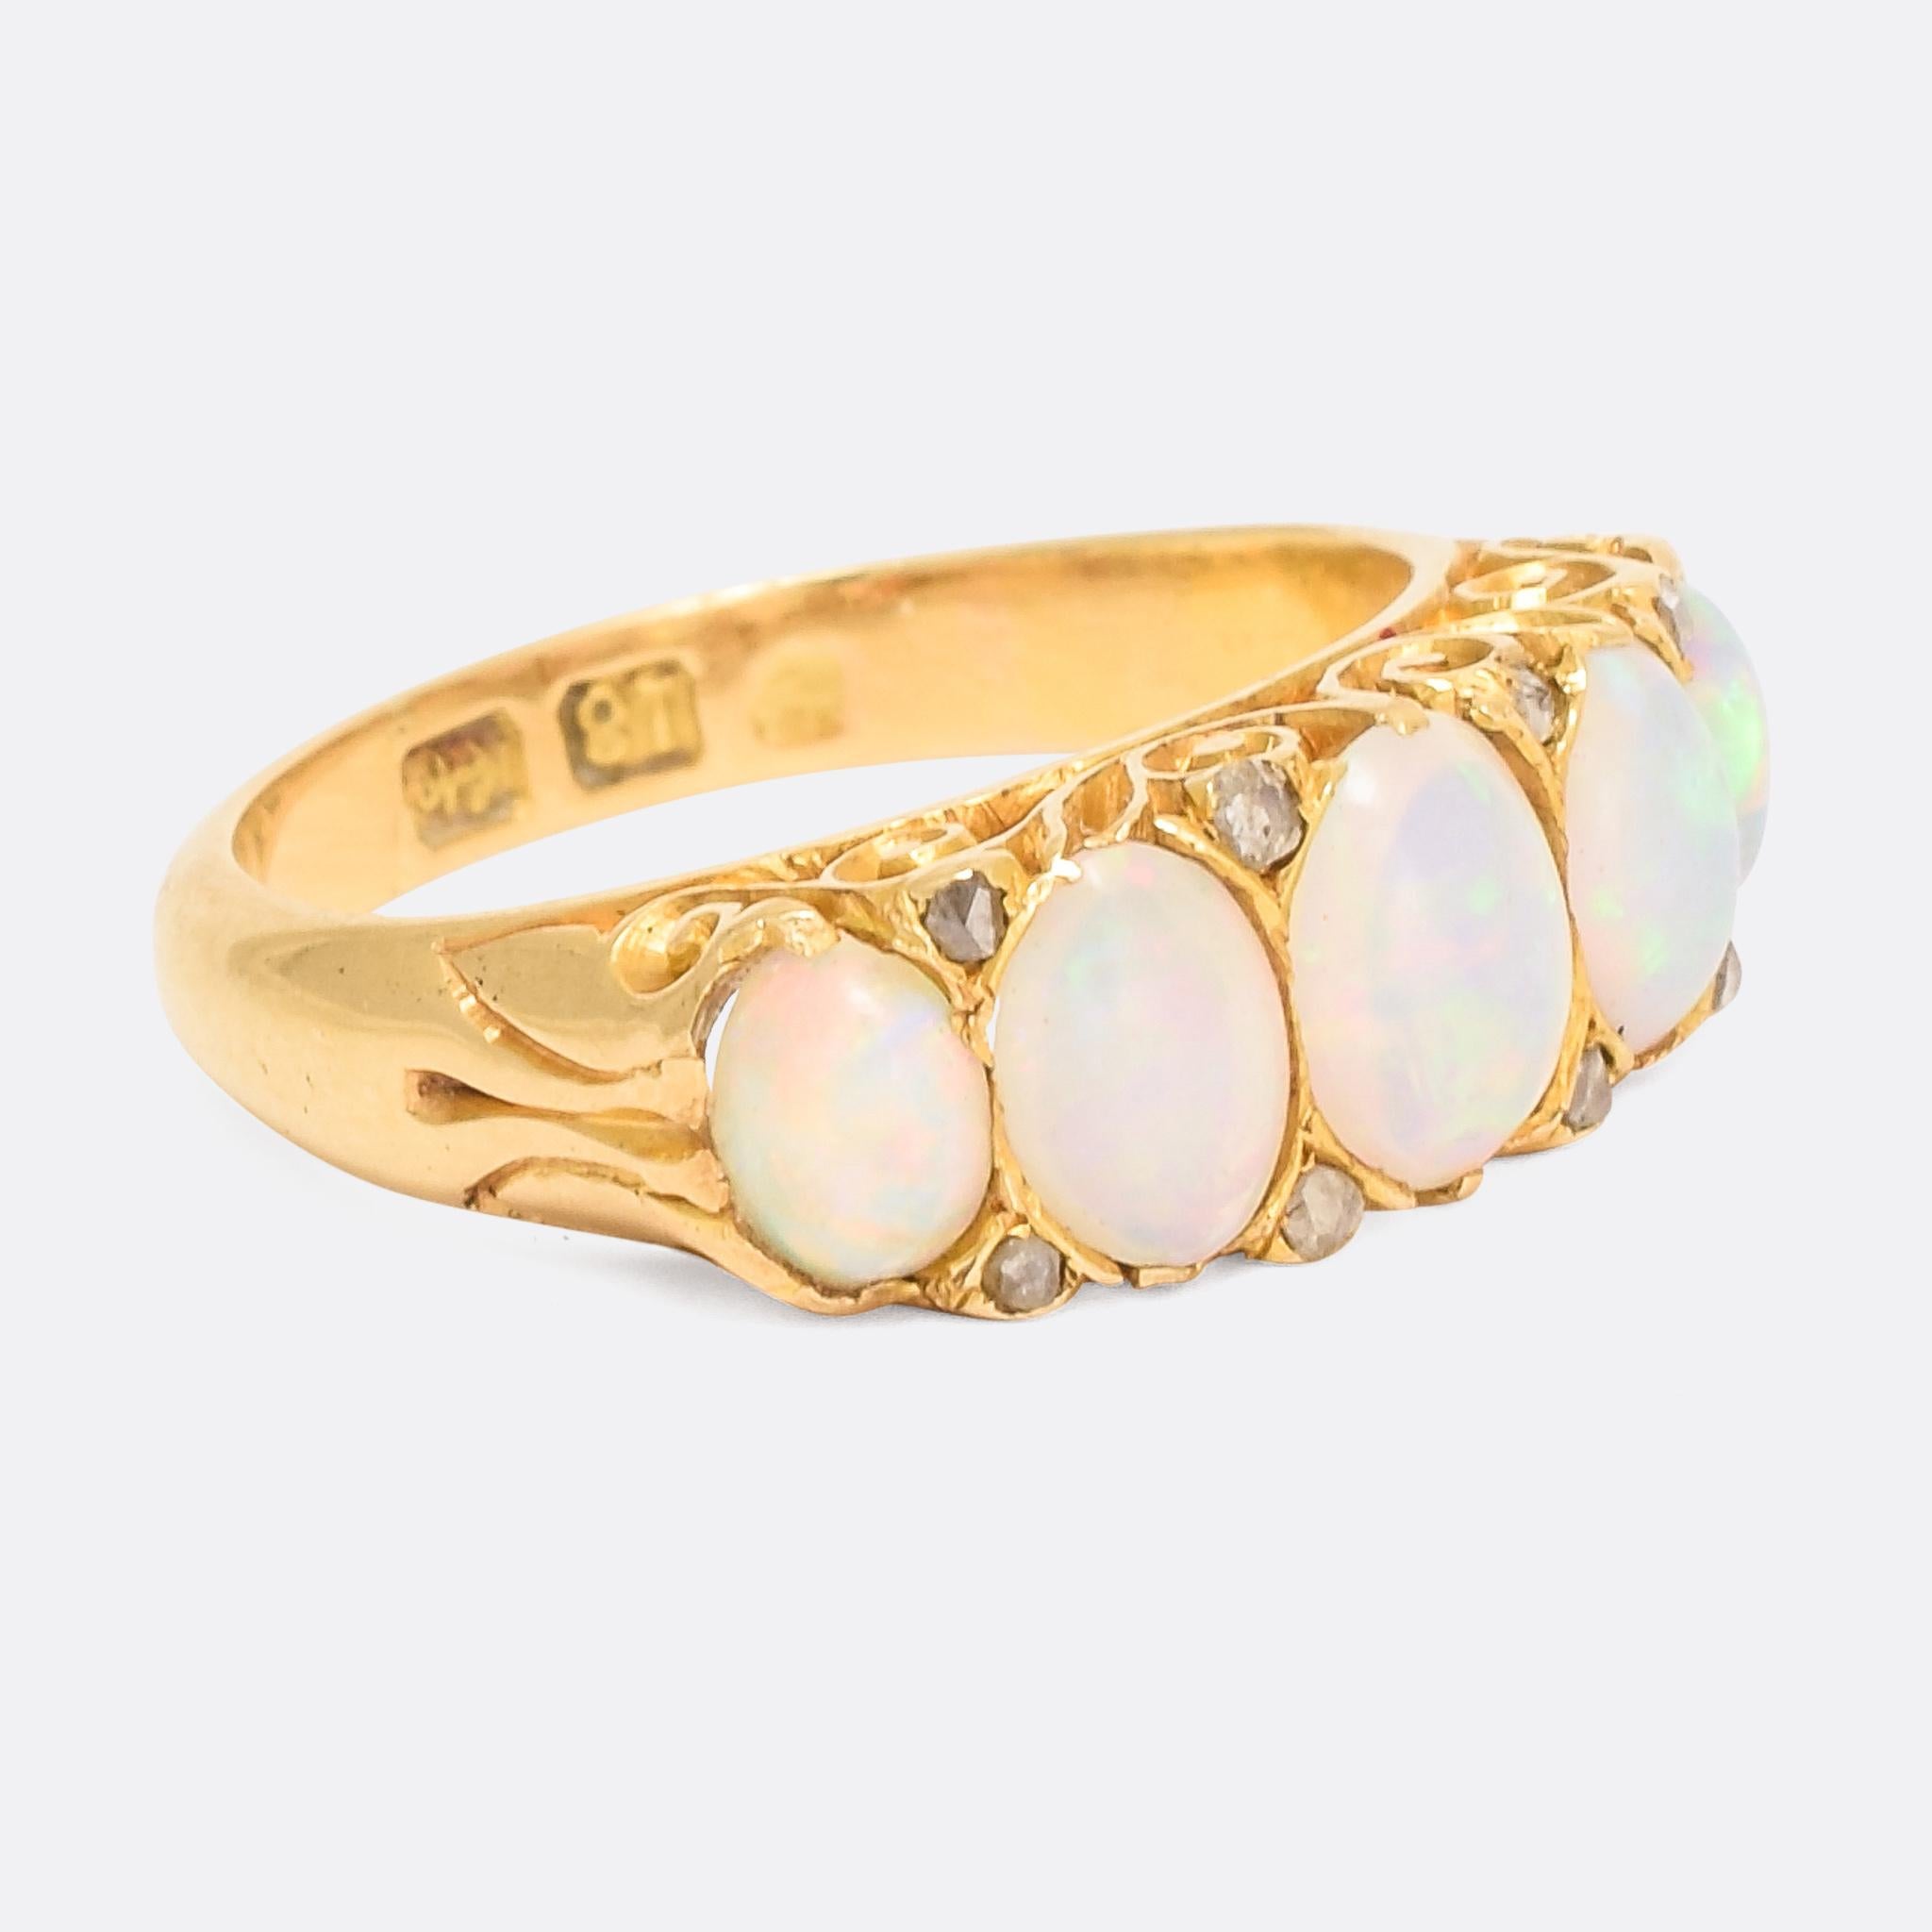 A particularly lovely Victorian ring. Set with five vibrant opal cabochons, the gallery features deeply chased scrollwork, and the in gaps between the oval stones are set rose cut diamond points. It's modelled in 18 karat yellow gold which has